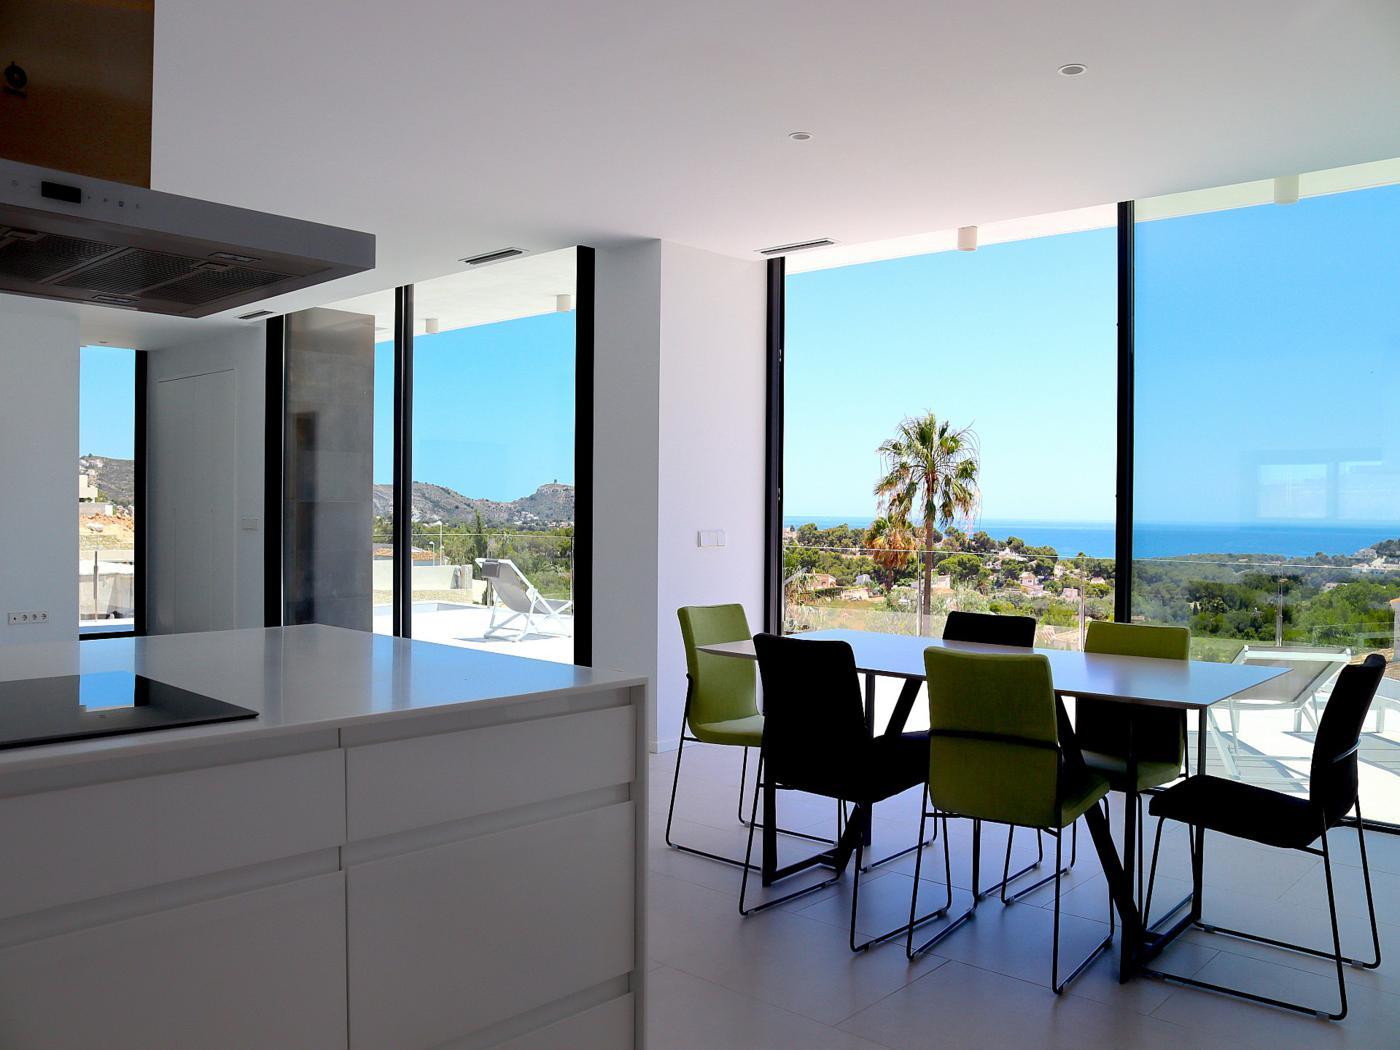 Fotogallerij - 4 - Exceptional homes in the Costa Blanca. Unparalleled Service. Exceptional properties in the Costa Blanca